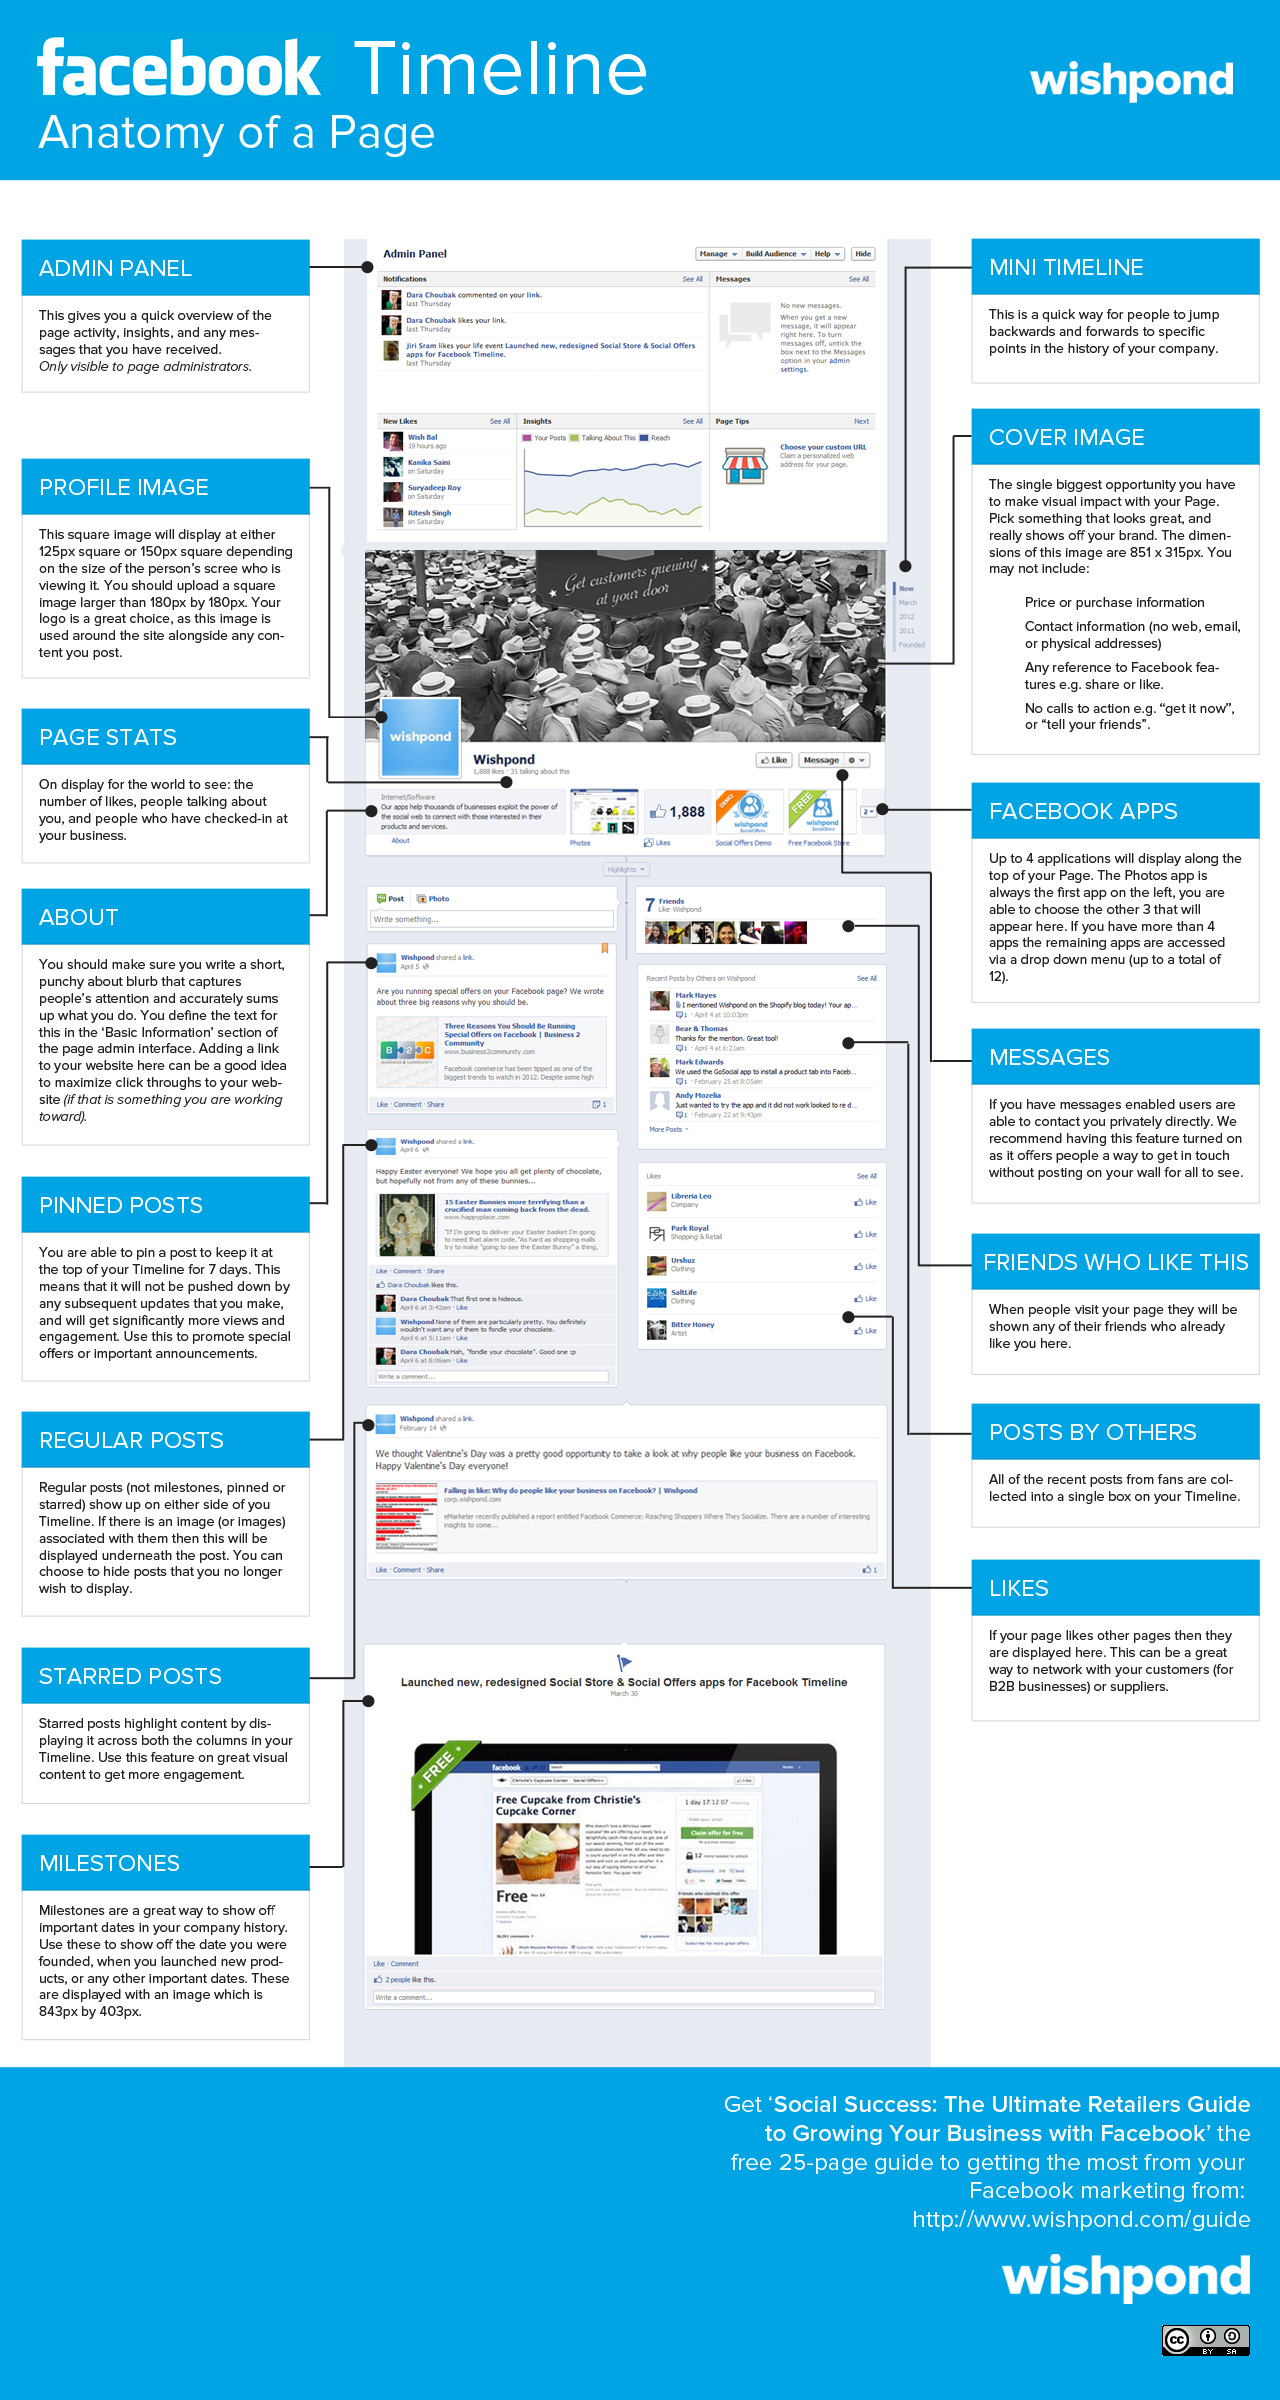 The Anatomy of a Facebook Timeline Page